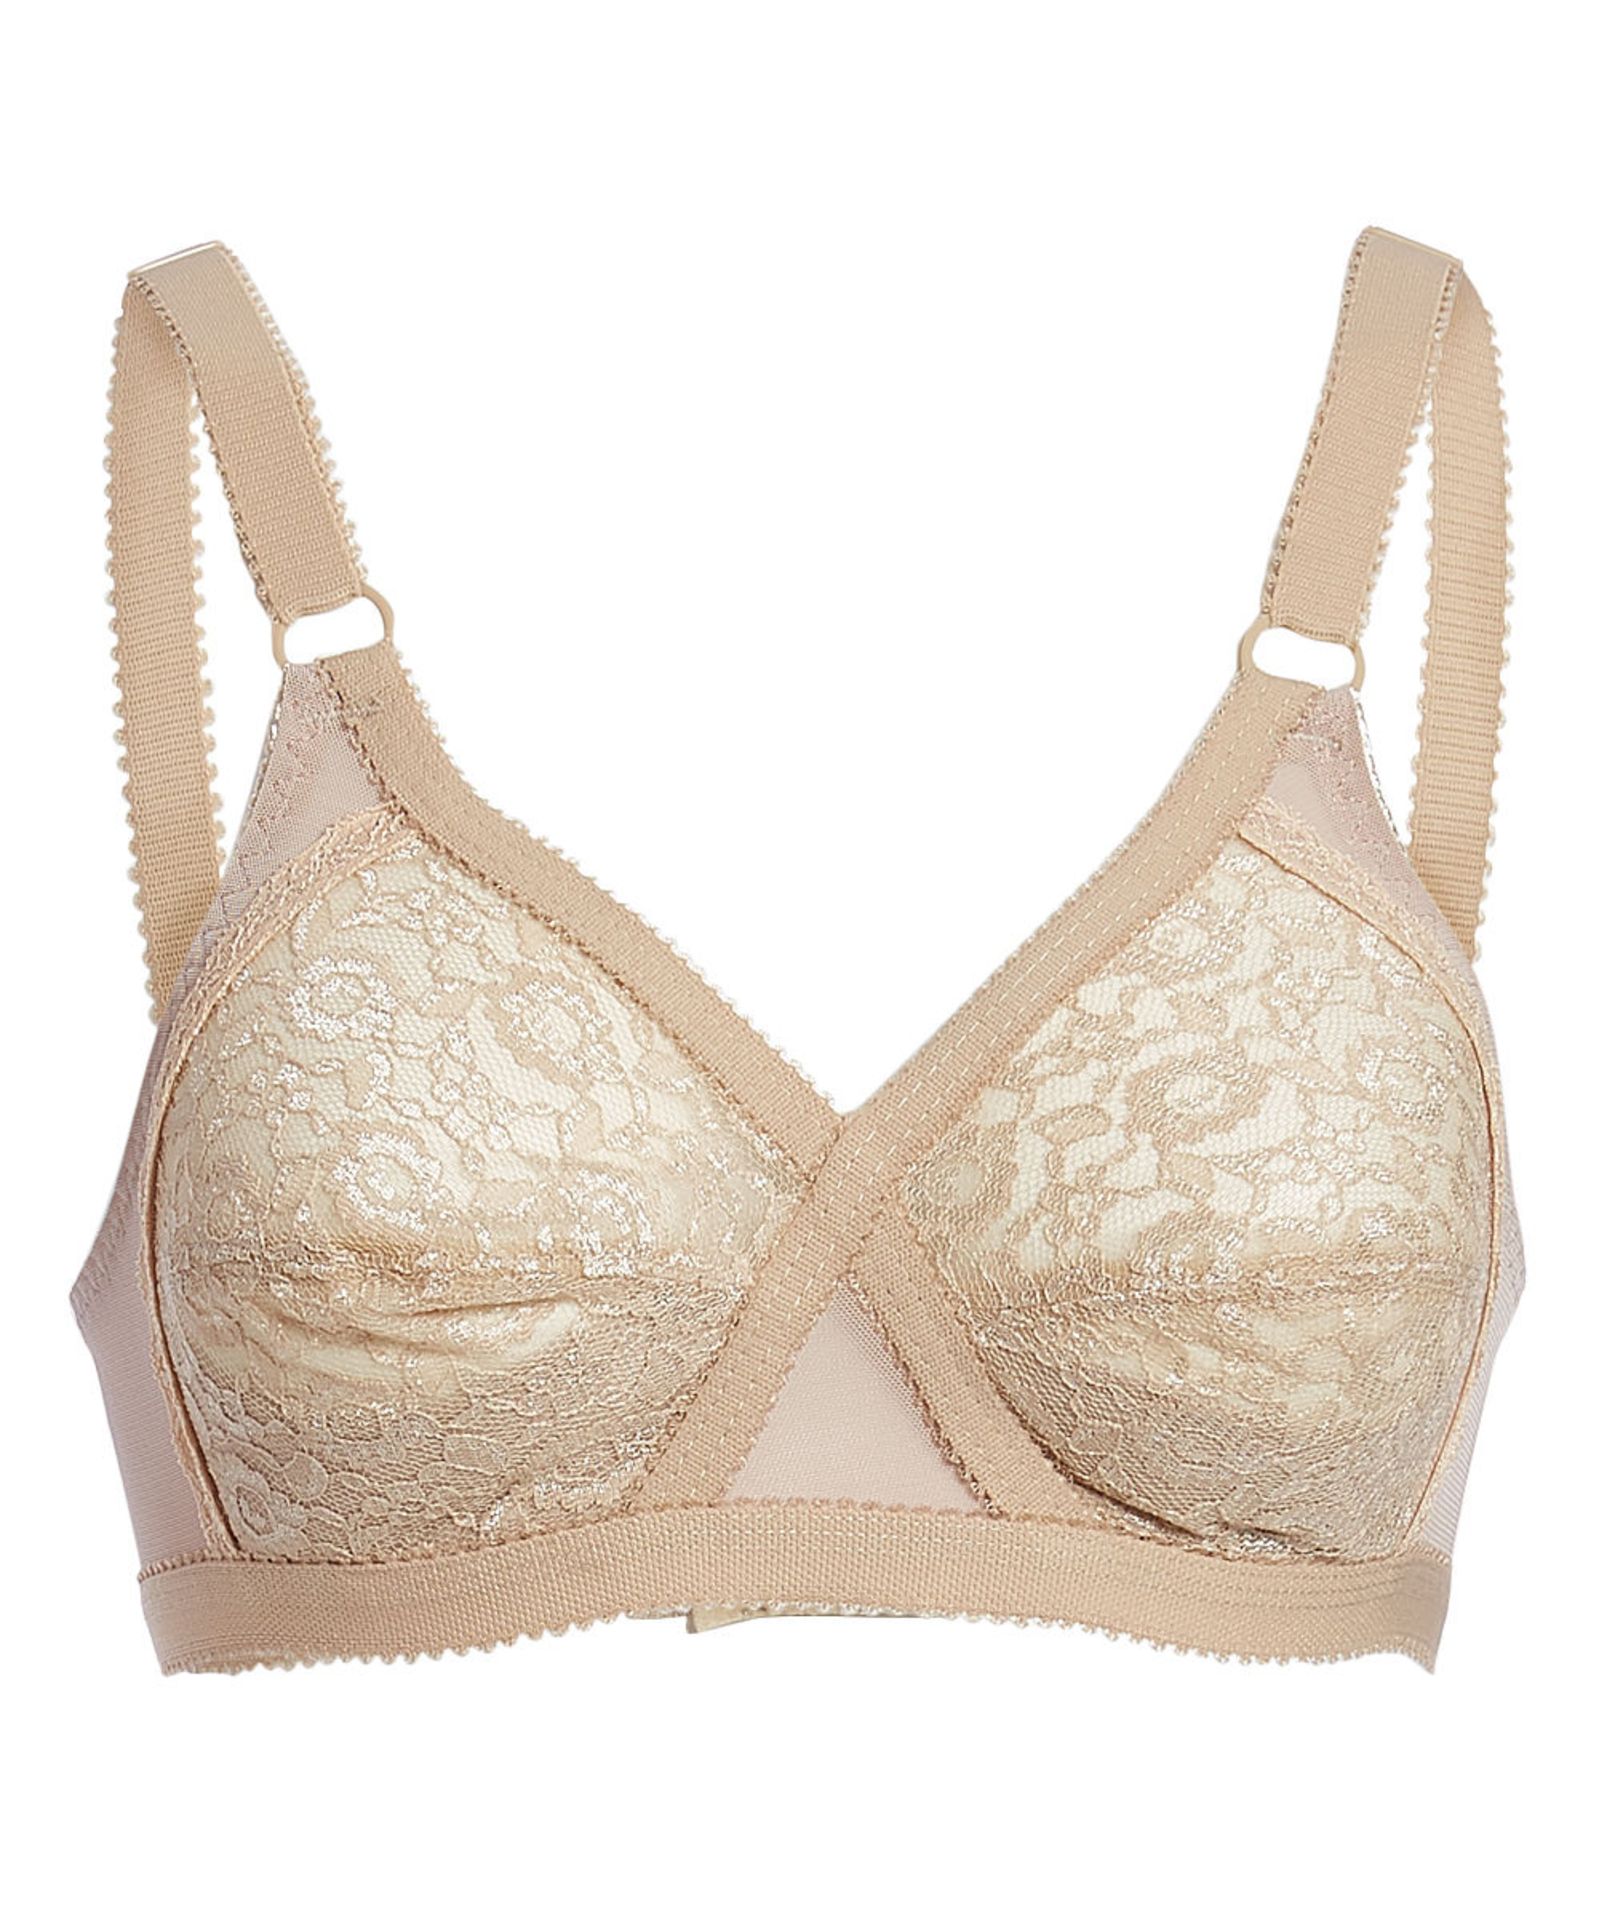 Valmont Beige Lace Wireless Full-Fit Crossover Bra - Plus Too (Size 44D) (New with tags) [Ref: